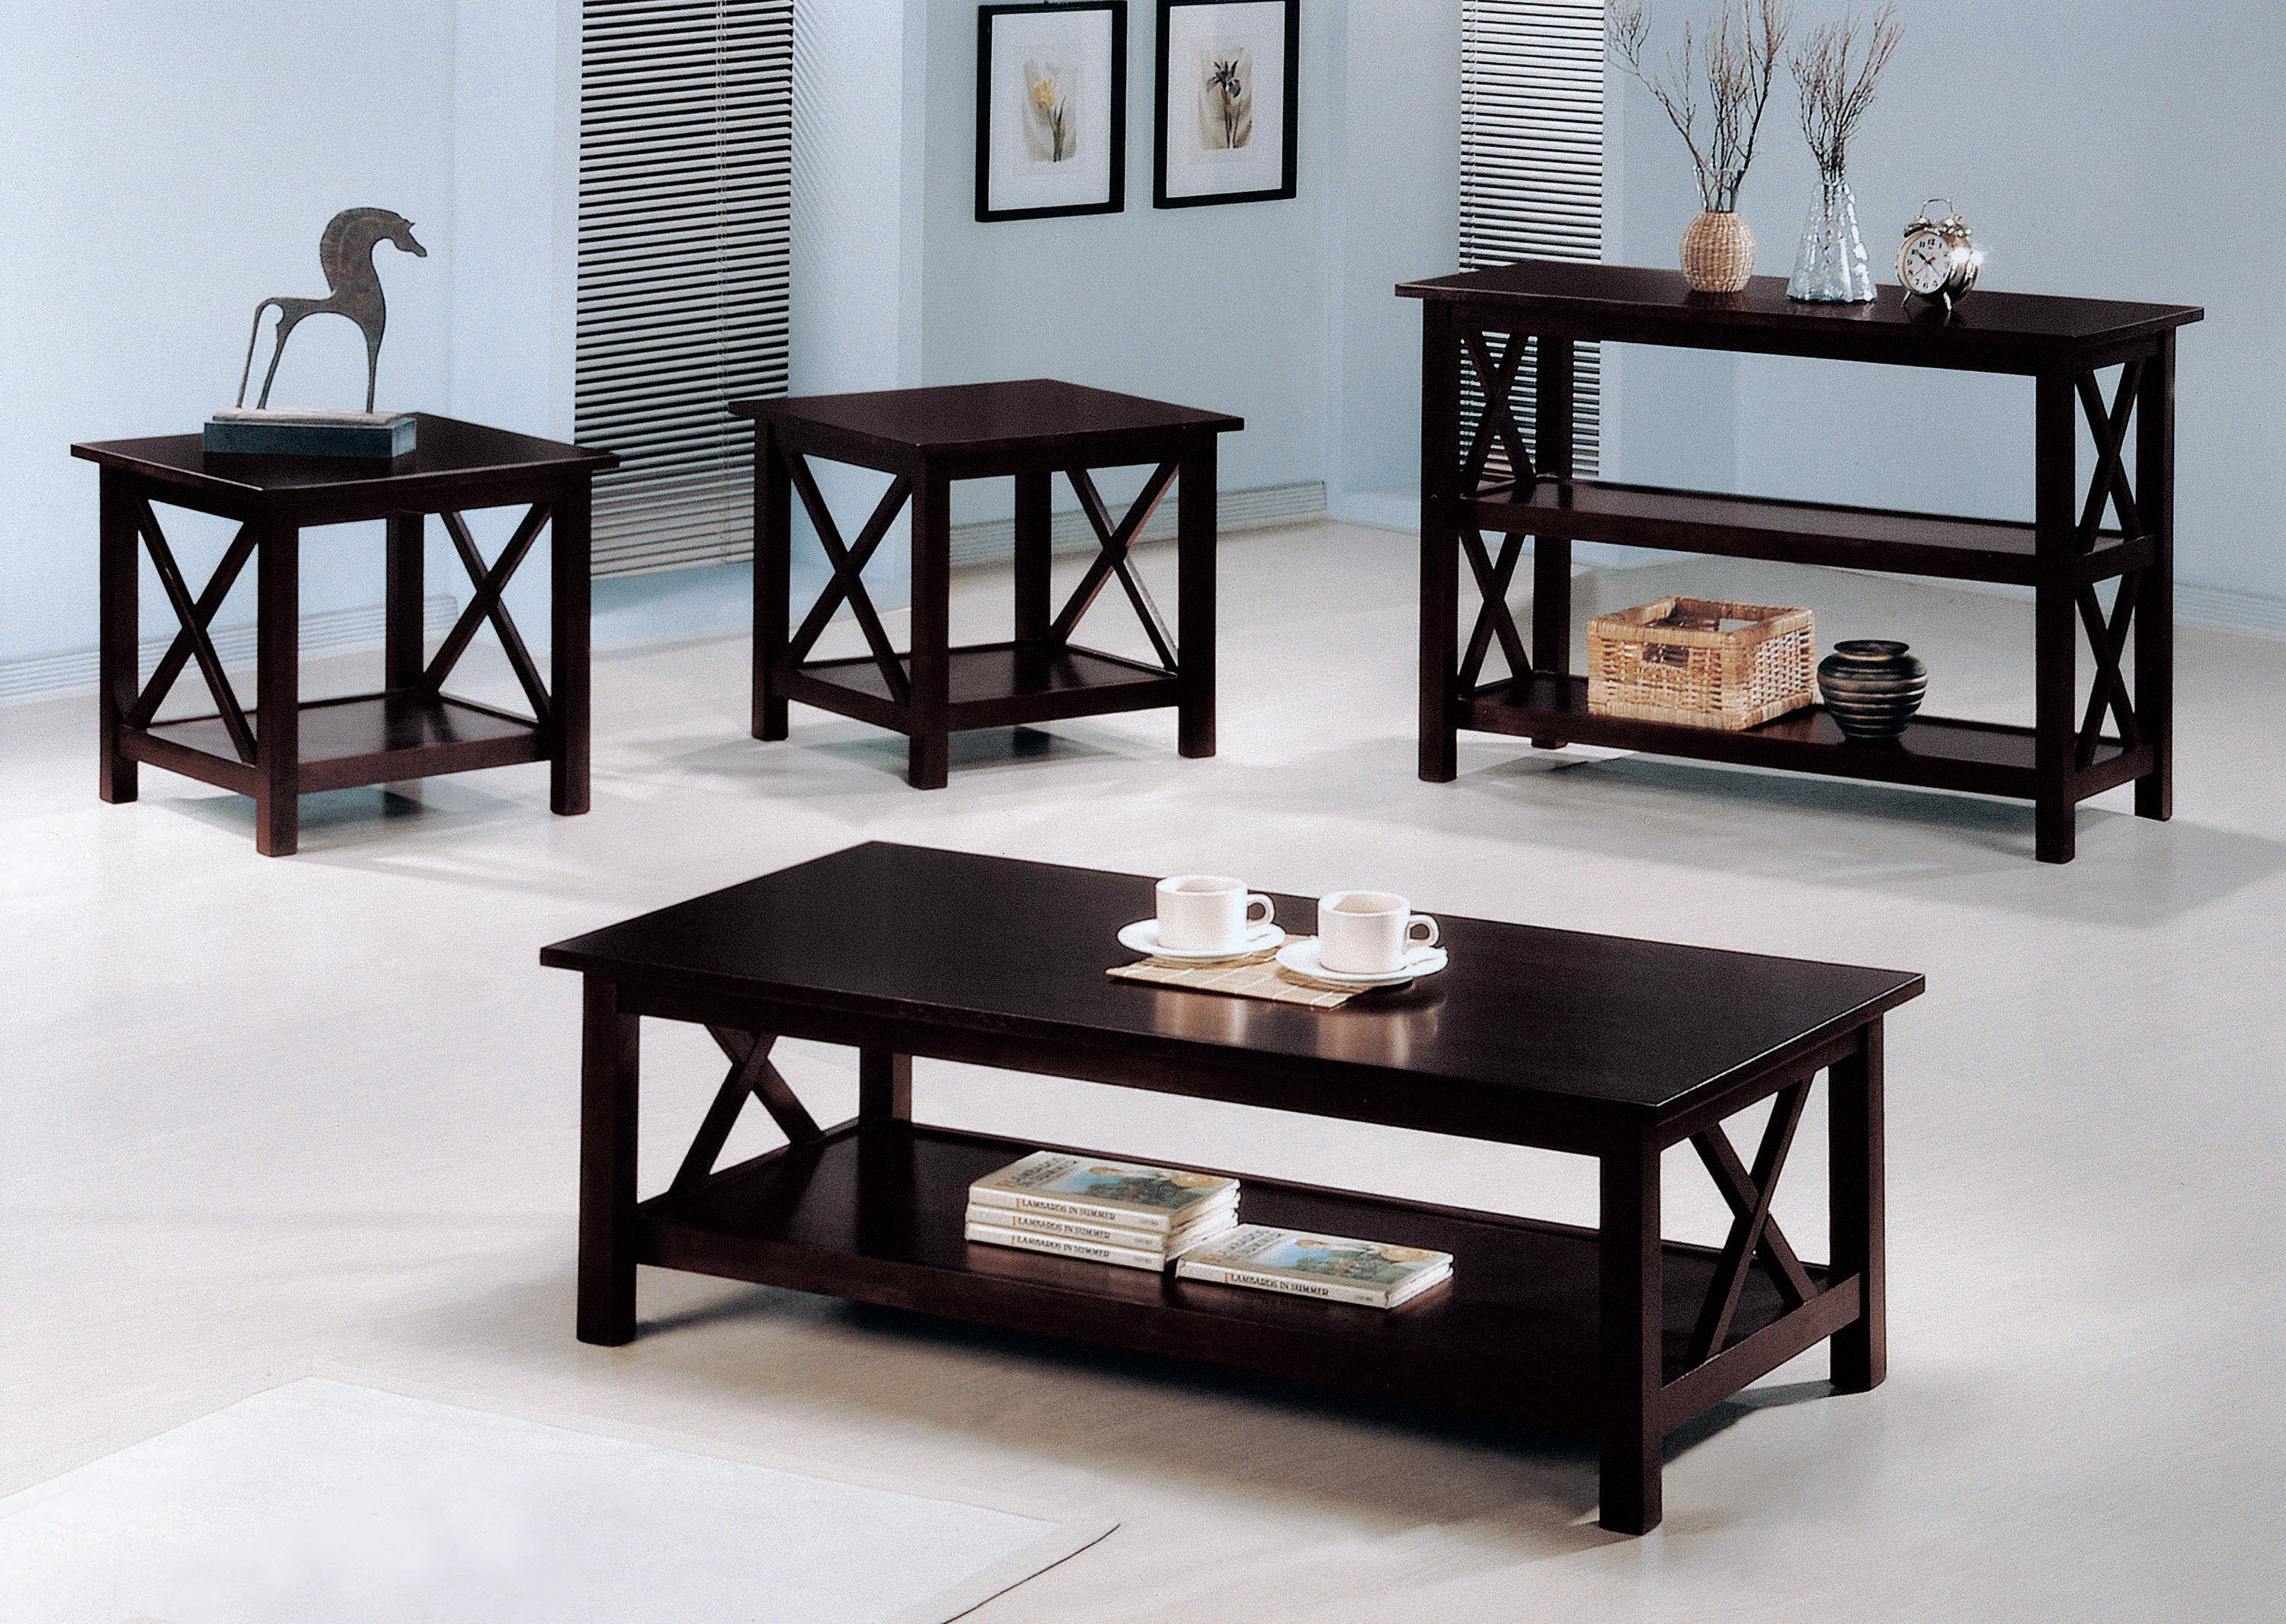 Transitional Coffee Table Set 5909 5909 in Merlot 